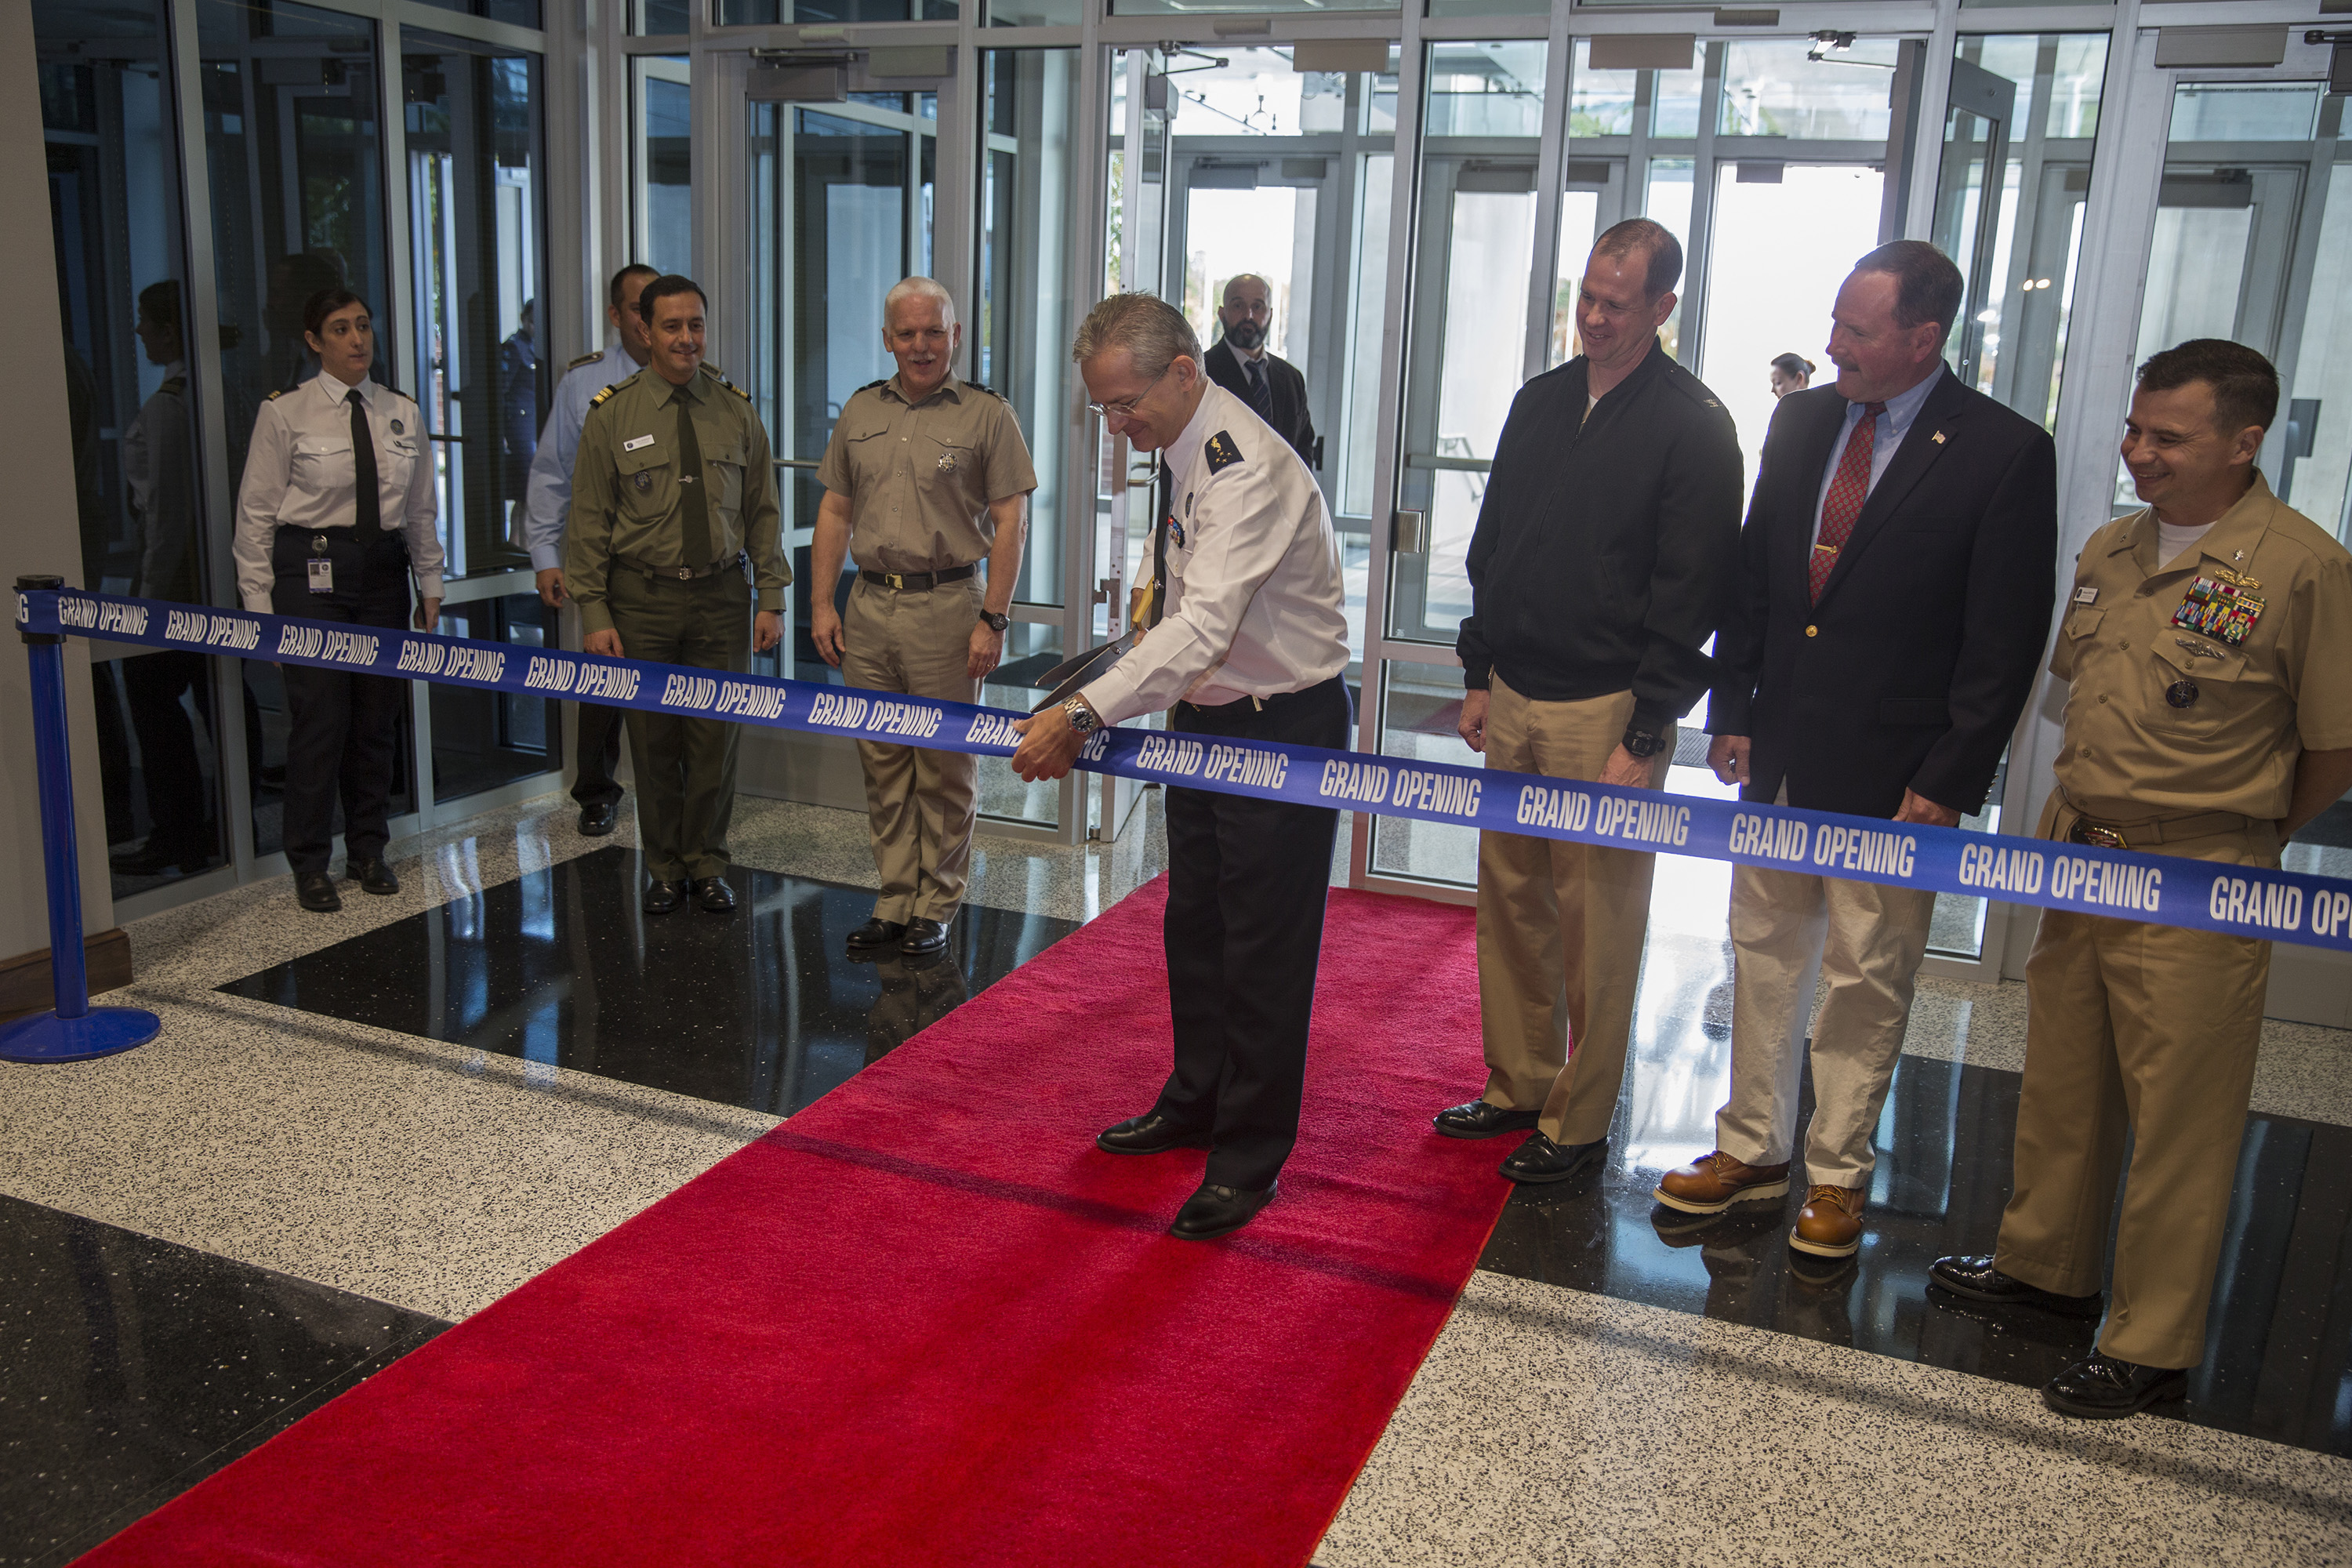 Work on the expansion of NATO's Allied Command Transformation was completed on November 15th, 2016, with a ribbon cutting Ceremony performed by the Supreme Allied Commander Transformation, French Air Force General Denis Mercier.